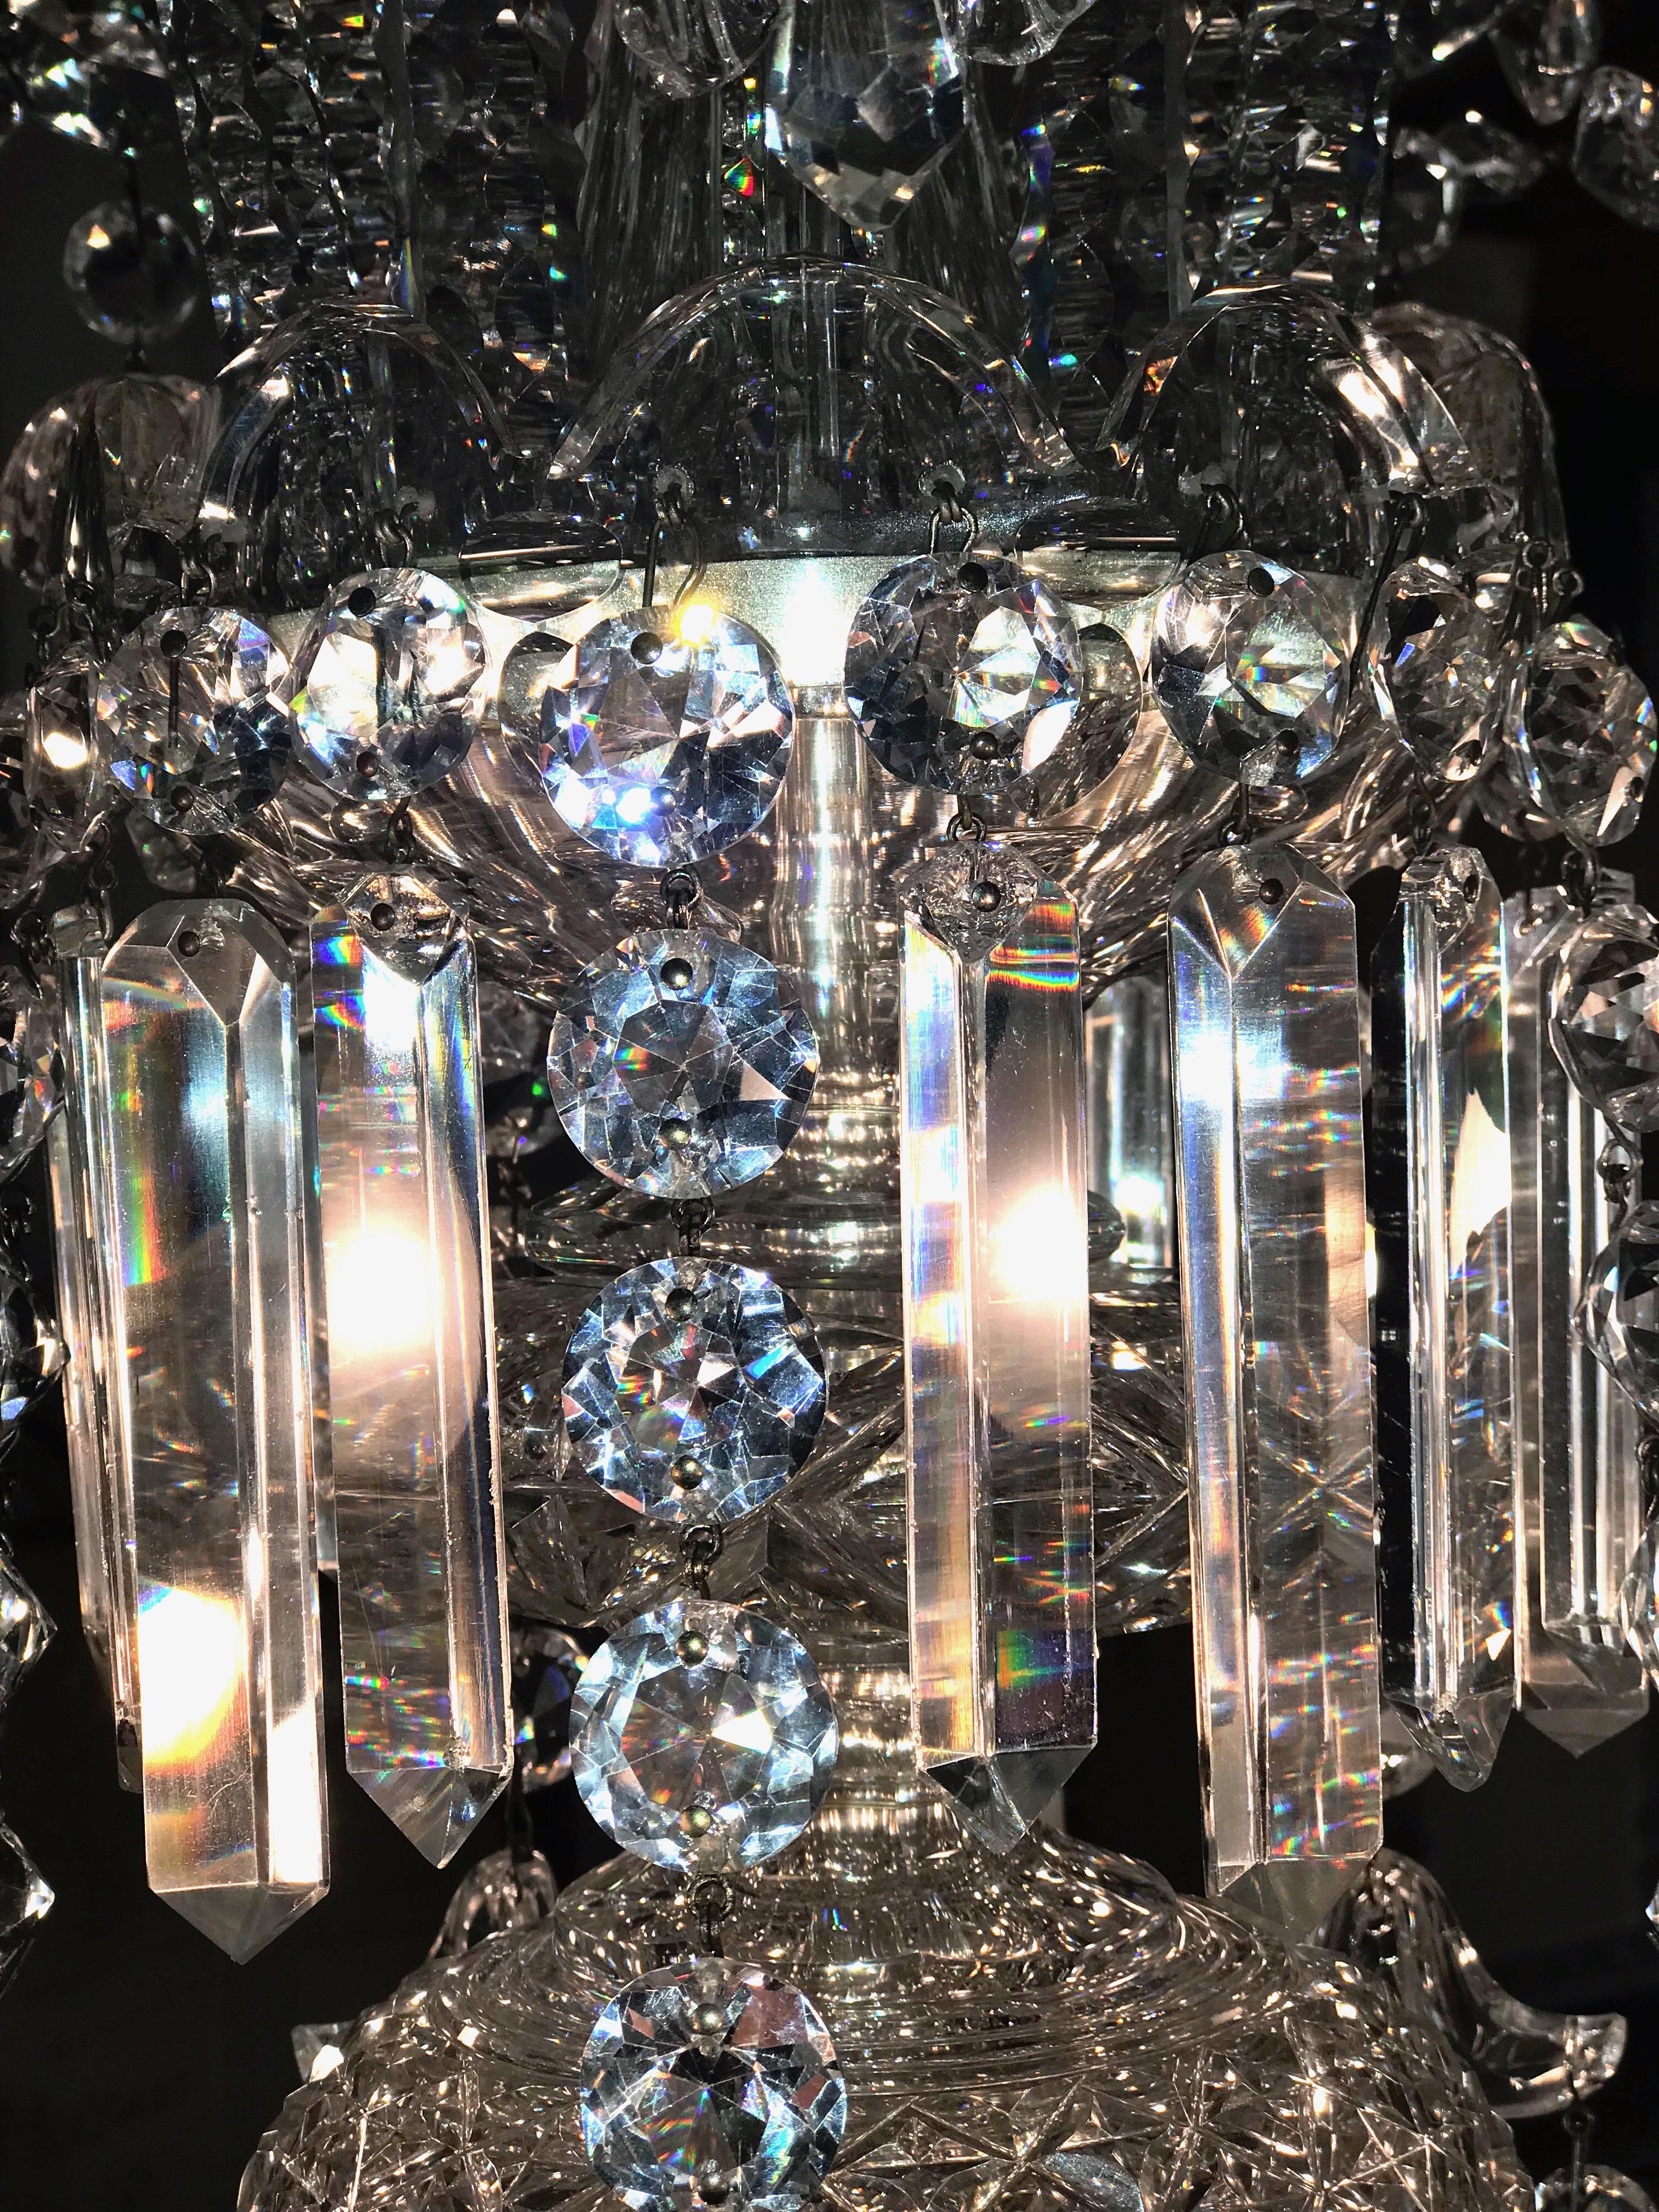 Baccarat Crystal Exceptional Chandelier, France, Early 19th Century For Sale 4